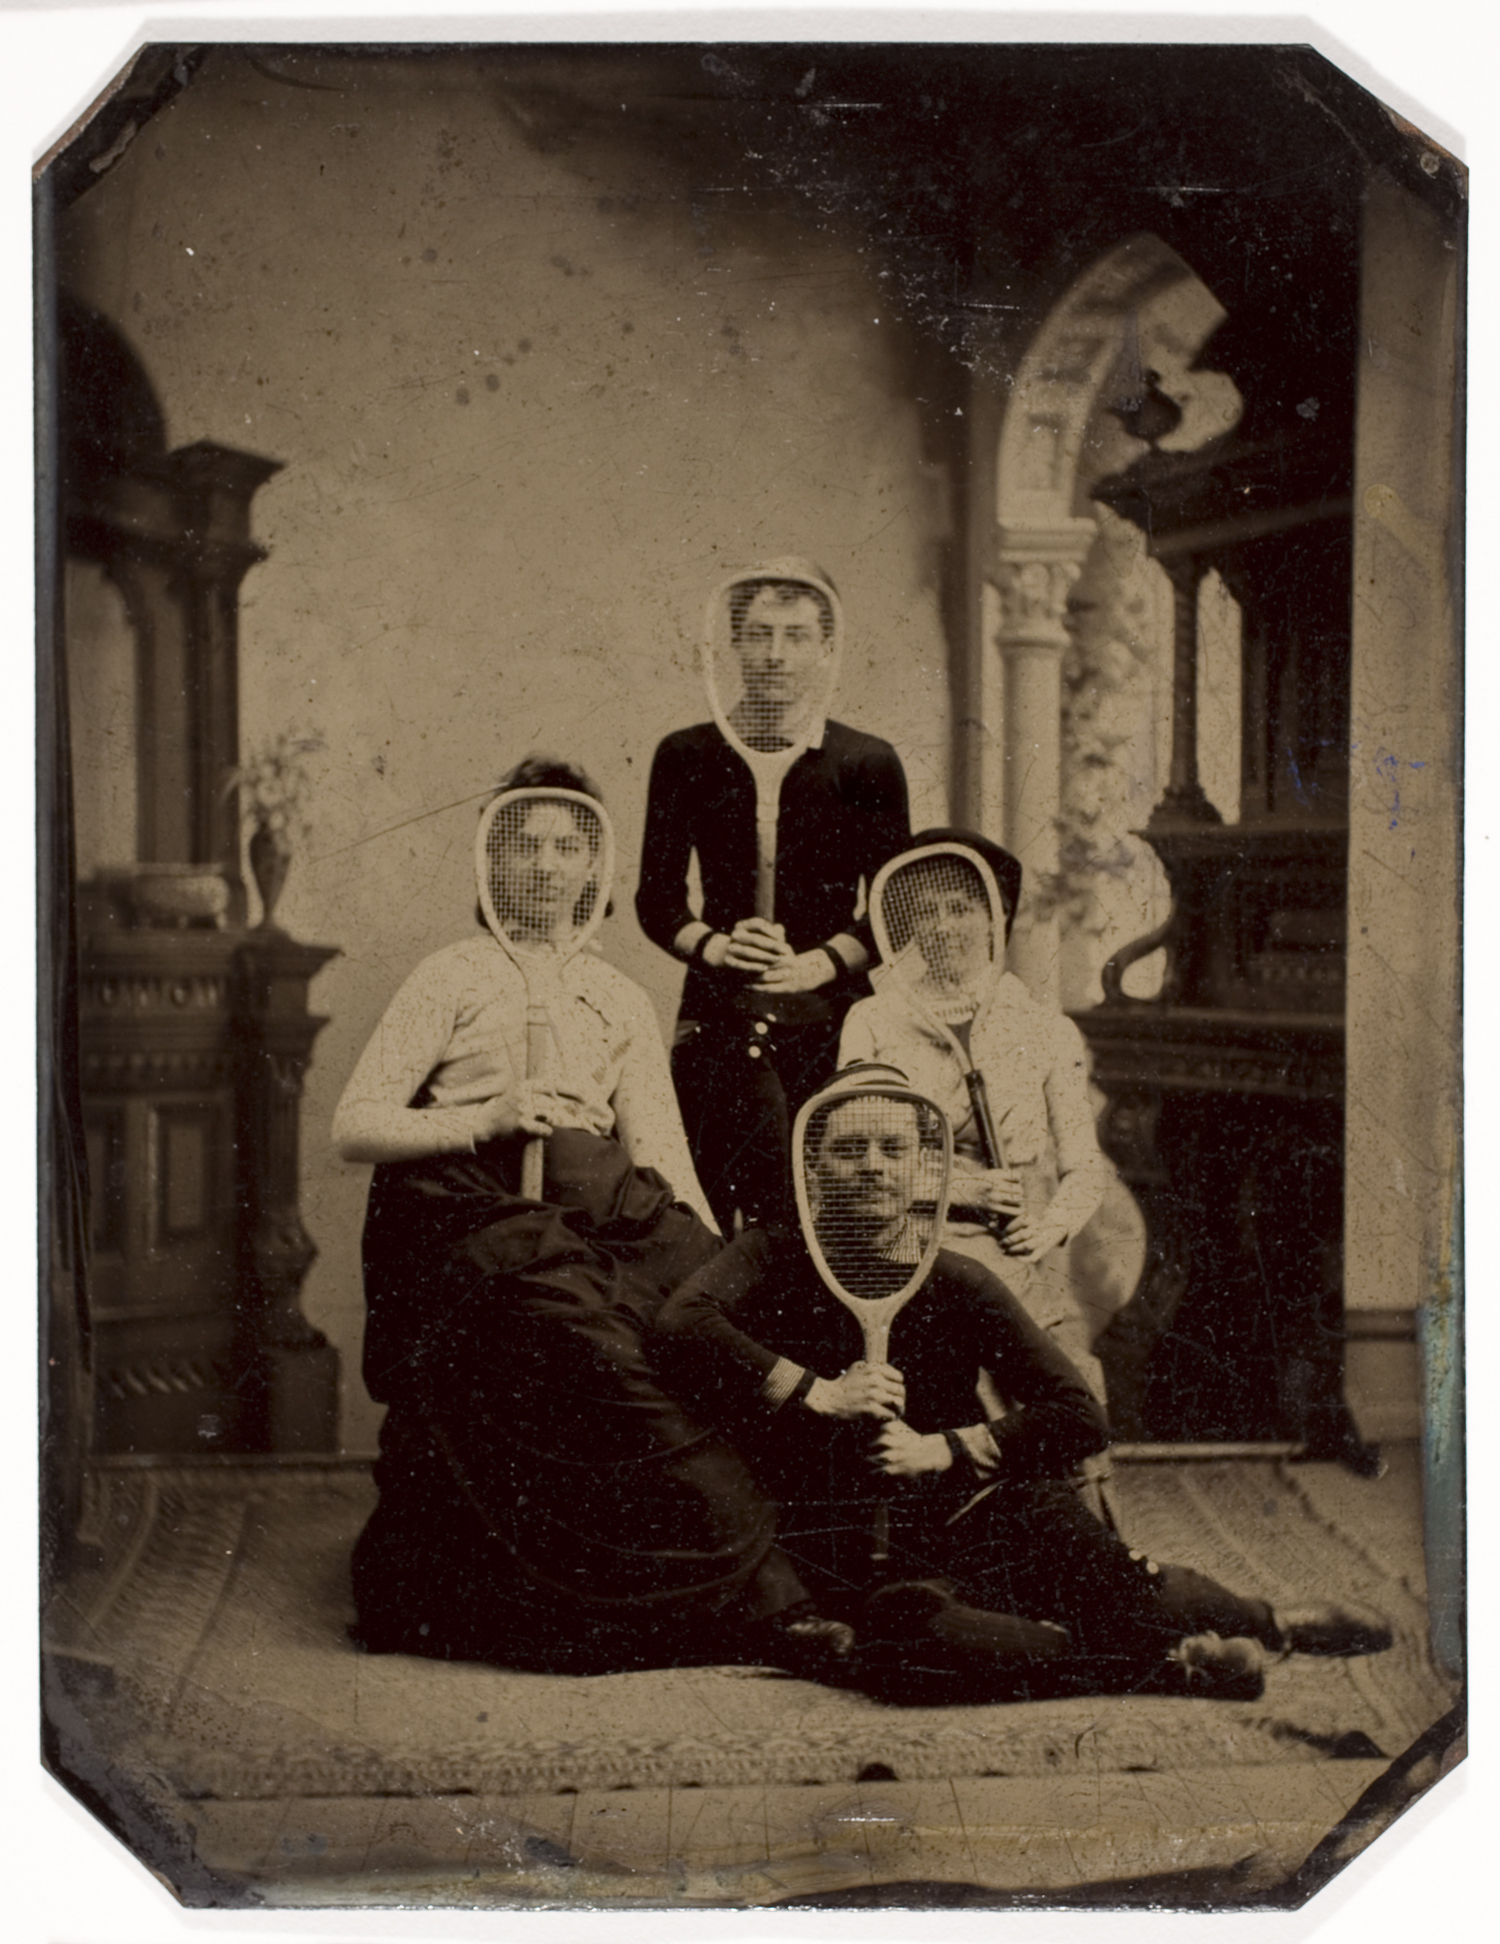 Unidentified Photographer, (Two Unidentified Women and Two Men with Tennis Rackets), ca. 1880, Court